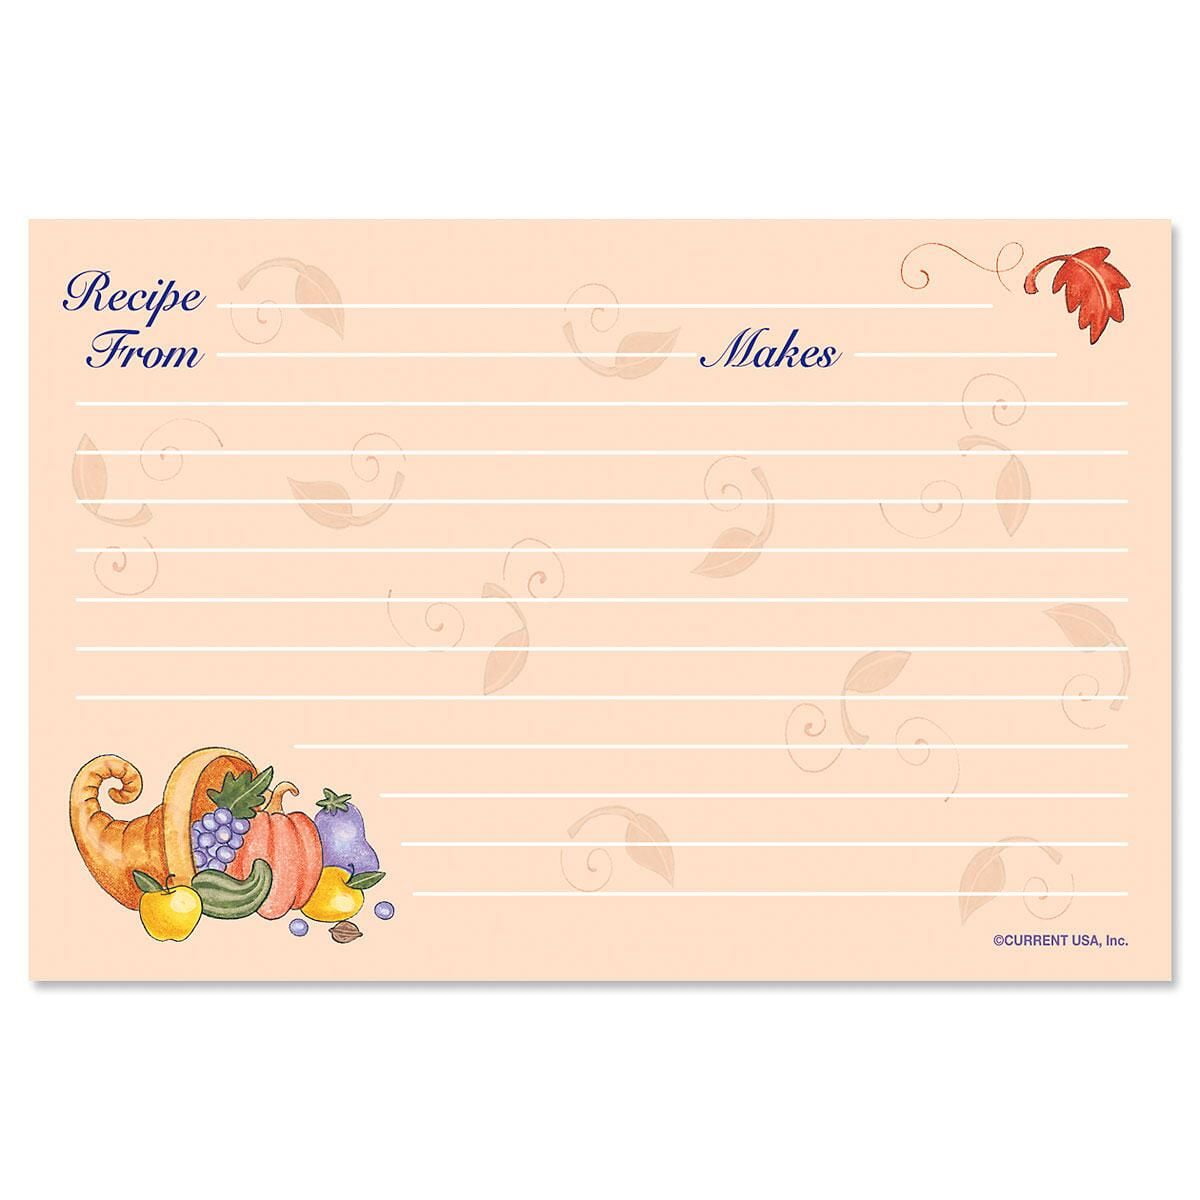 Peaks and Troughs 4x6 Recipe Card Dividers - Free Printables Online